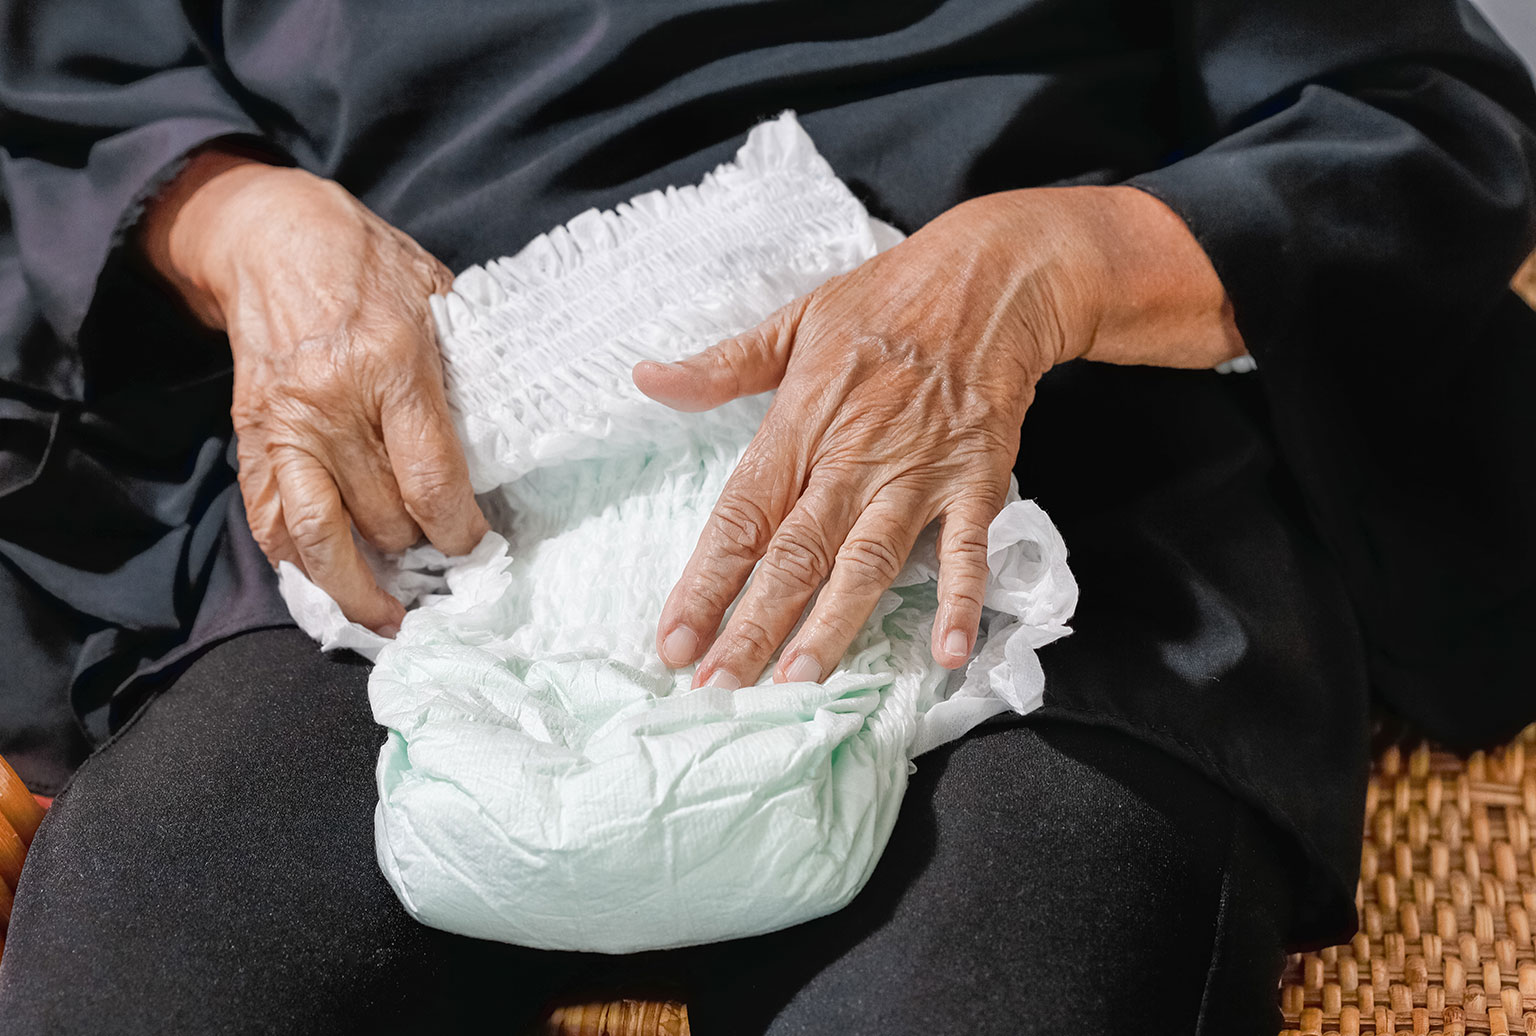 Medicare and adult diapers: Coverage, supplies, and costs